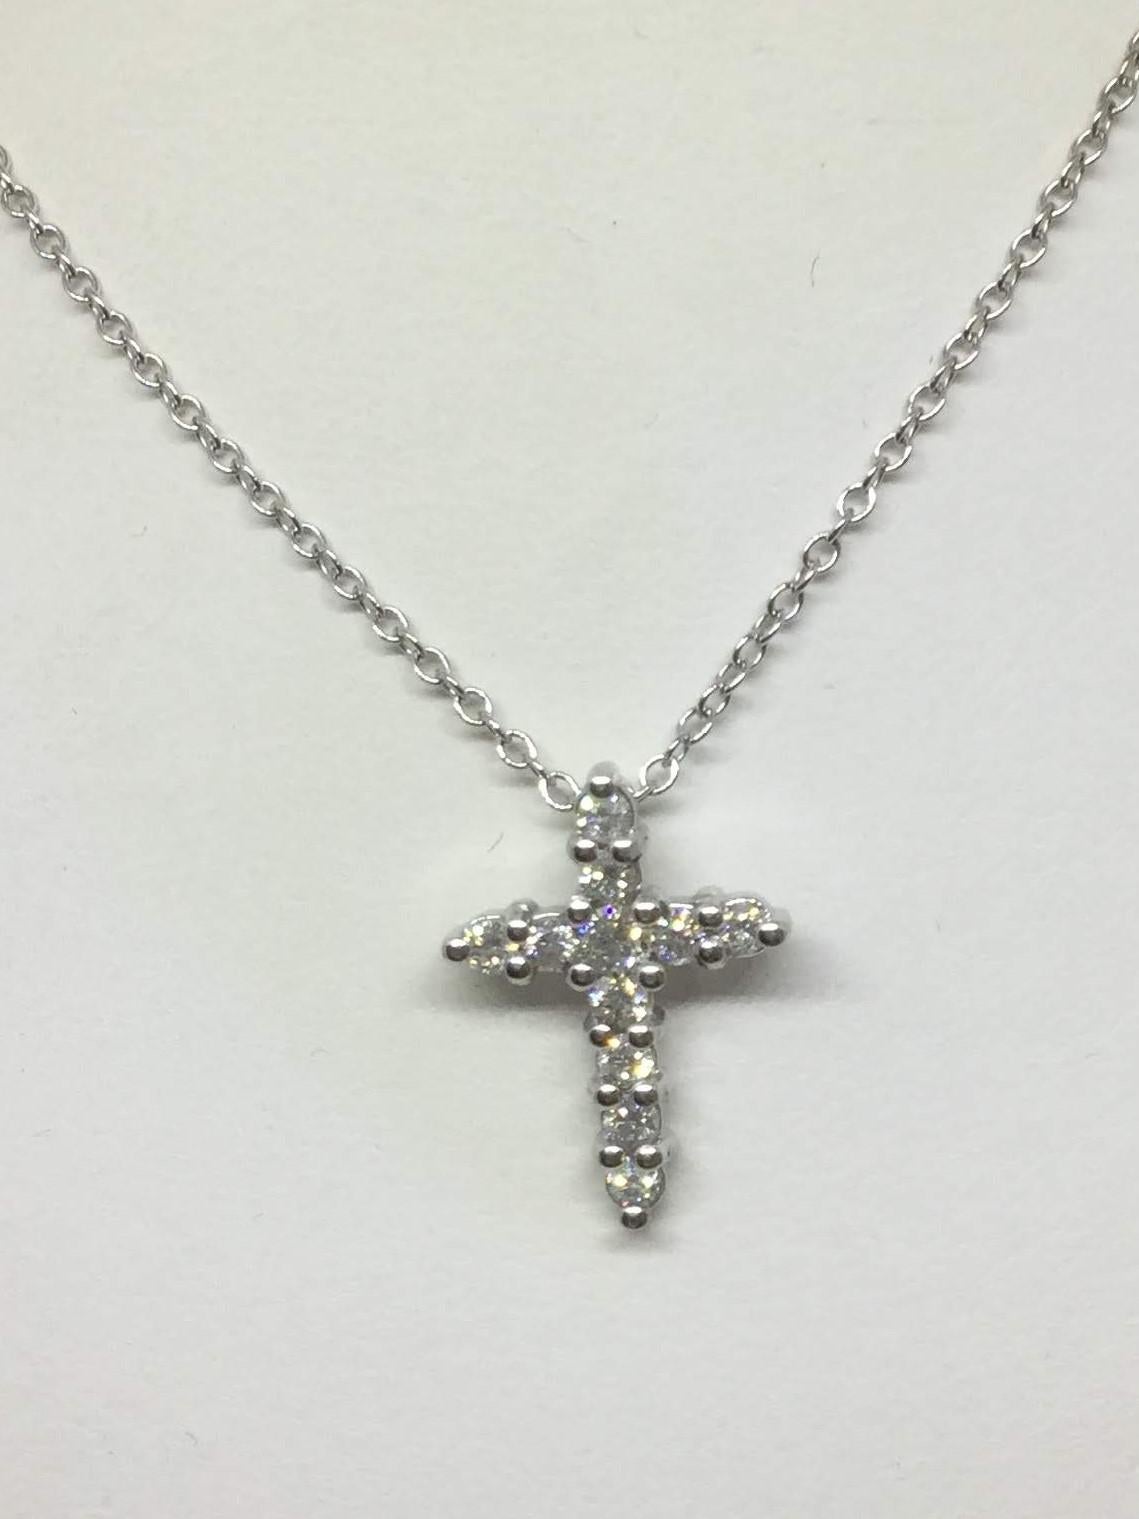 14K White gold diamond cross necklace. The diamonds are round brilliant cut weighing 0.43 ctw H/SI. The diamonds are common prong set. The chain is 16 inches in length.